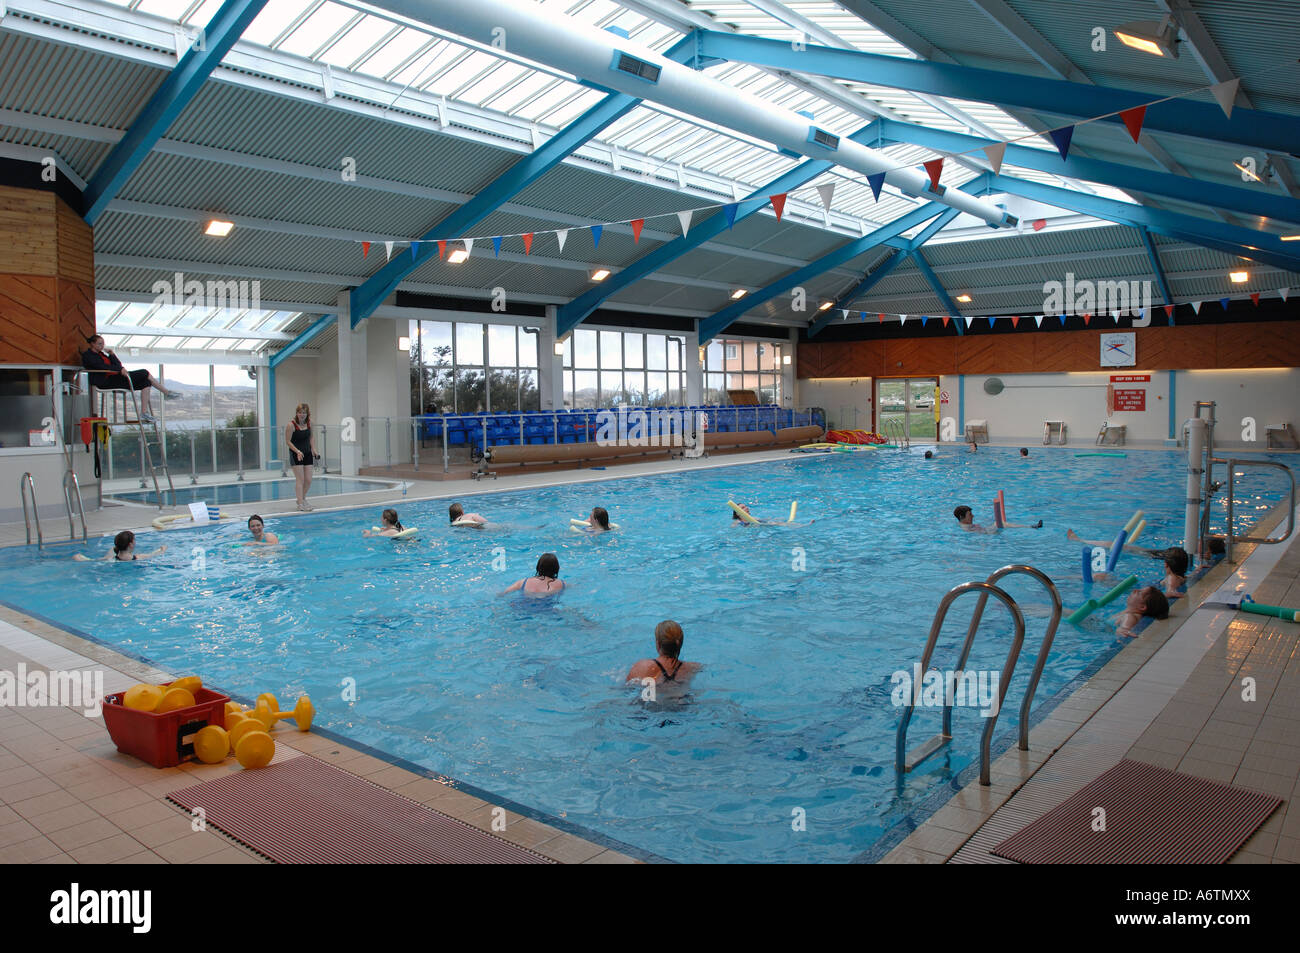 https://c8.alamy.com/comp/A6TMXX/swimming-pool-at-the-leisure-centre-in-stanley-the-capital-of-the-A6TMXX.jpg